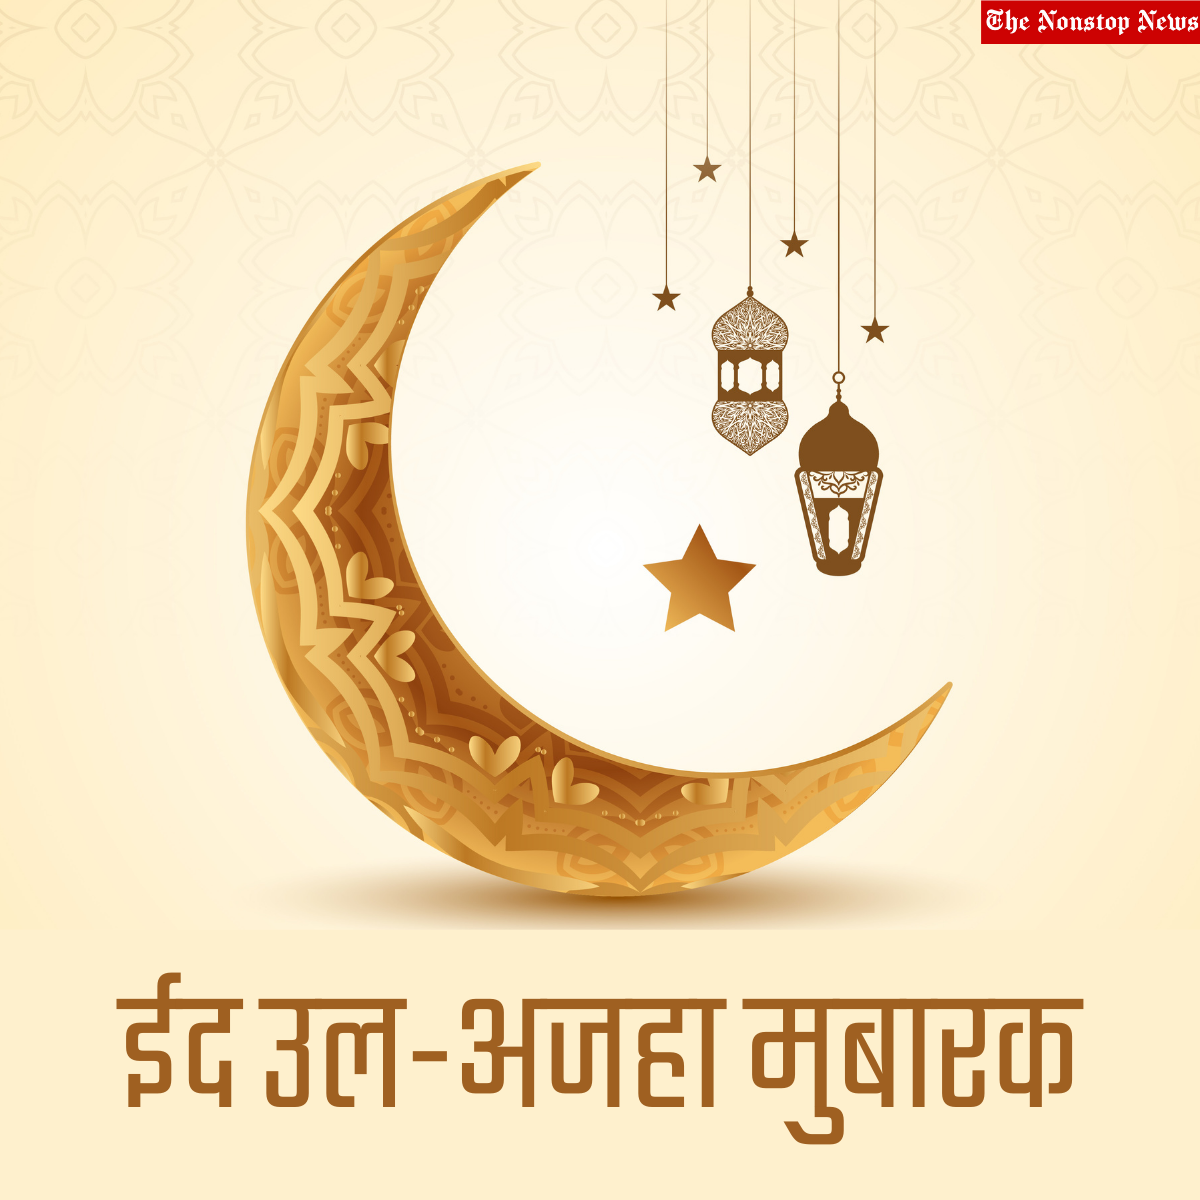 Happy Eid Ul-Adha Mubarak 2022: Hindi Greetings, Shayari, Quotes, Wishes, Images, Messages, Posters, Stickers to Share